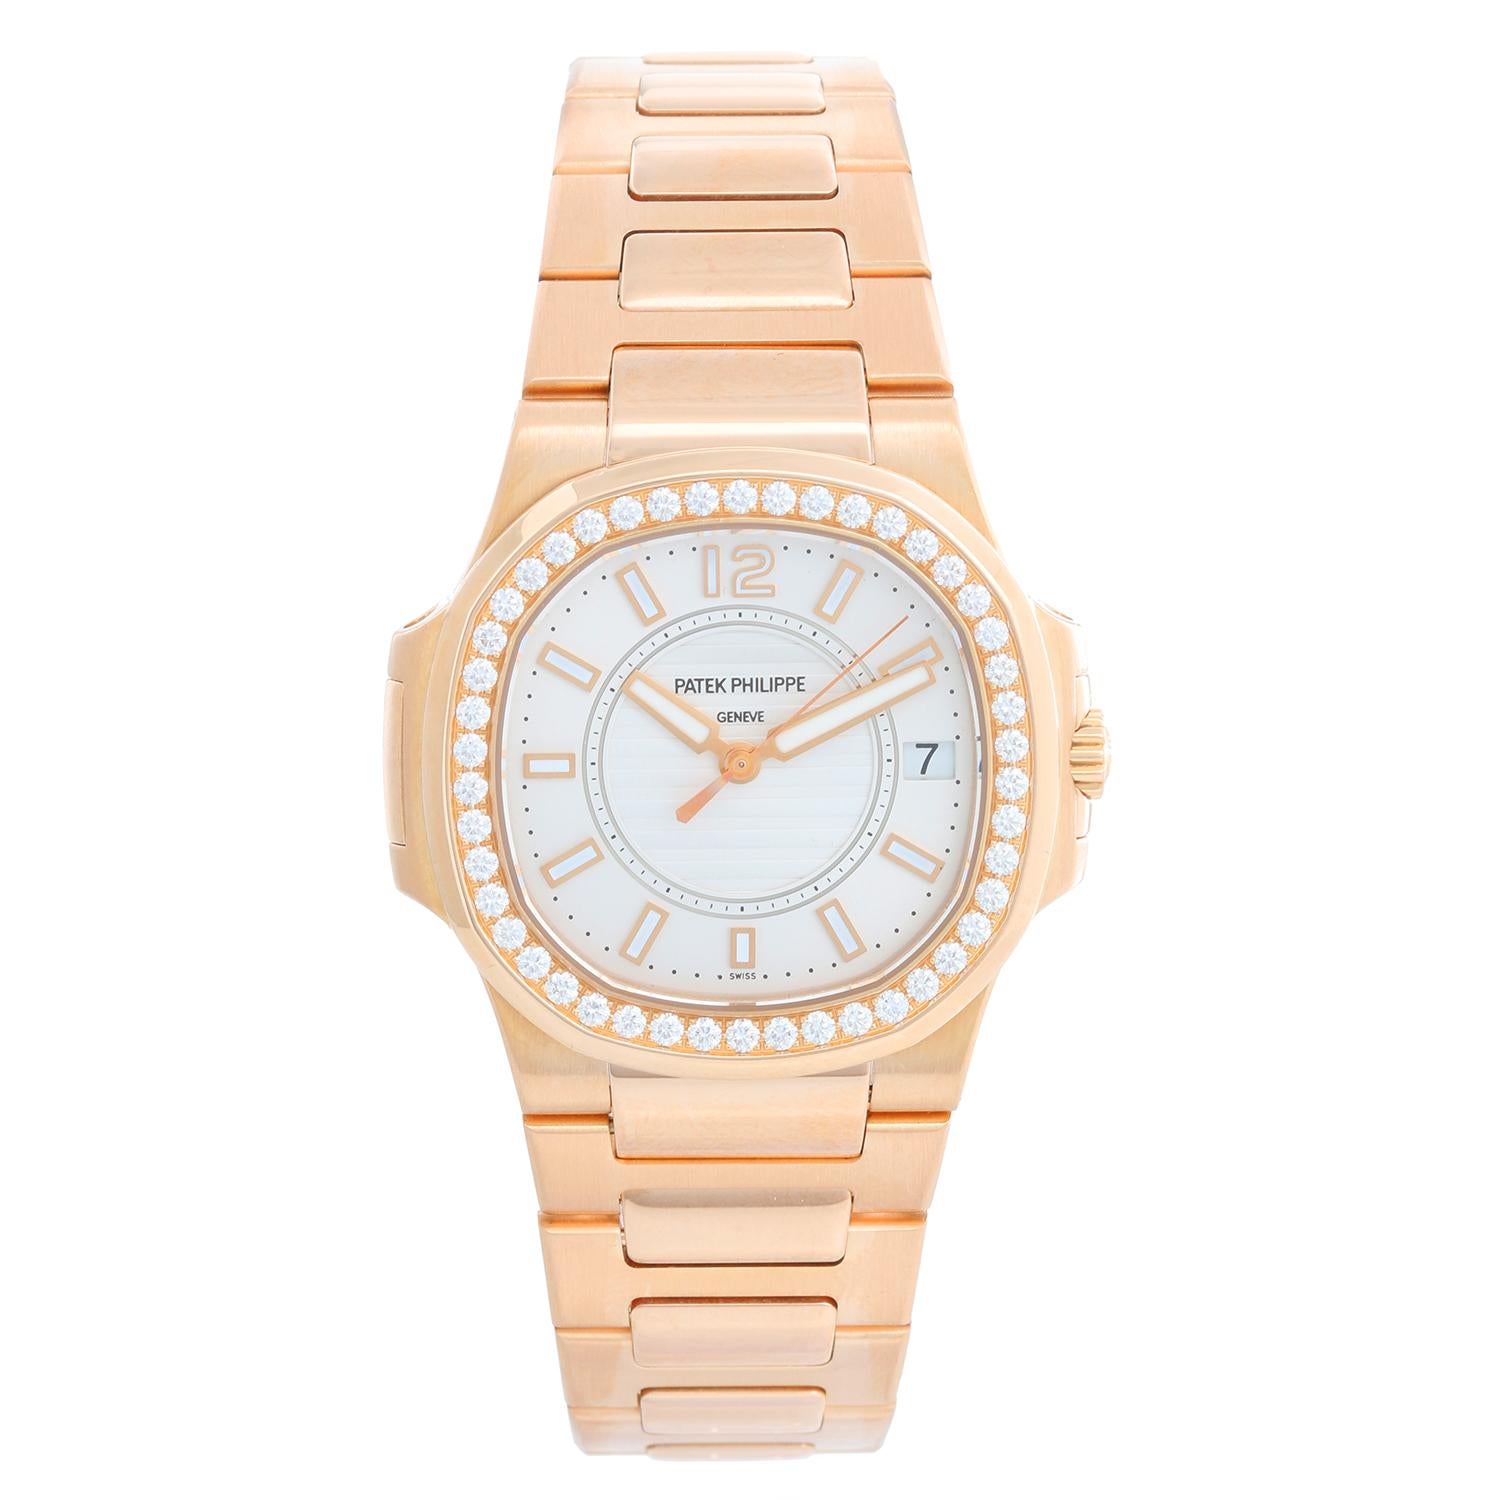 Patek Philippe Ladies 18k Rose Gold Diamond Nautilus 7010/1R - Quartz. 18k rose gold case with diamond bezel. Silver dial with rose gold stick/ luminous markers; date at 3 o'clock. 18k rose gold bracelet with deployant clasp. Pre-owned with Patek